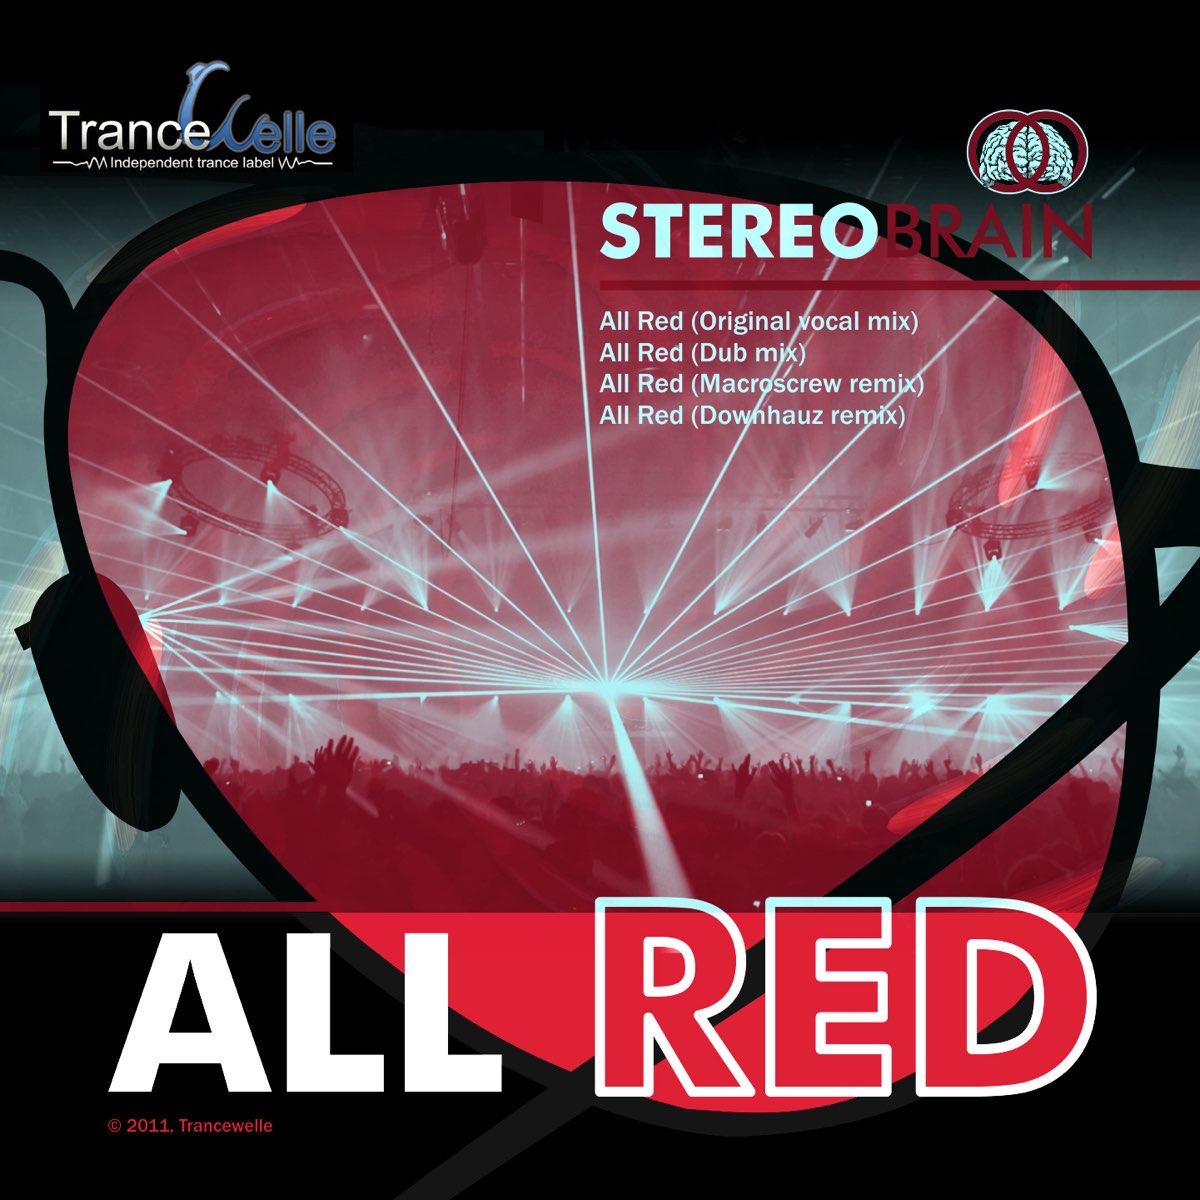 Red original mix. Stolen stereo Red. All is Red песня. All Brain.